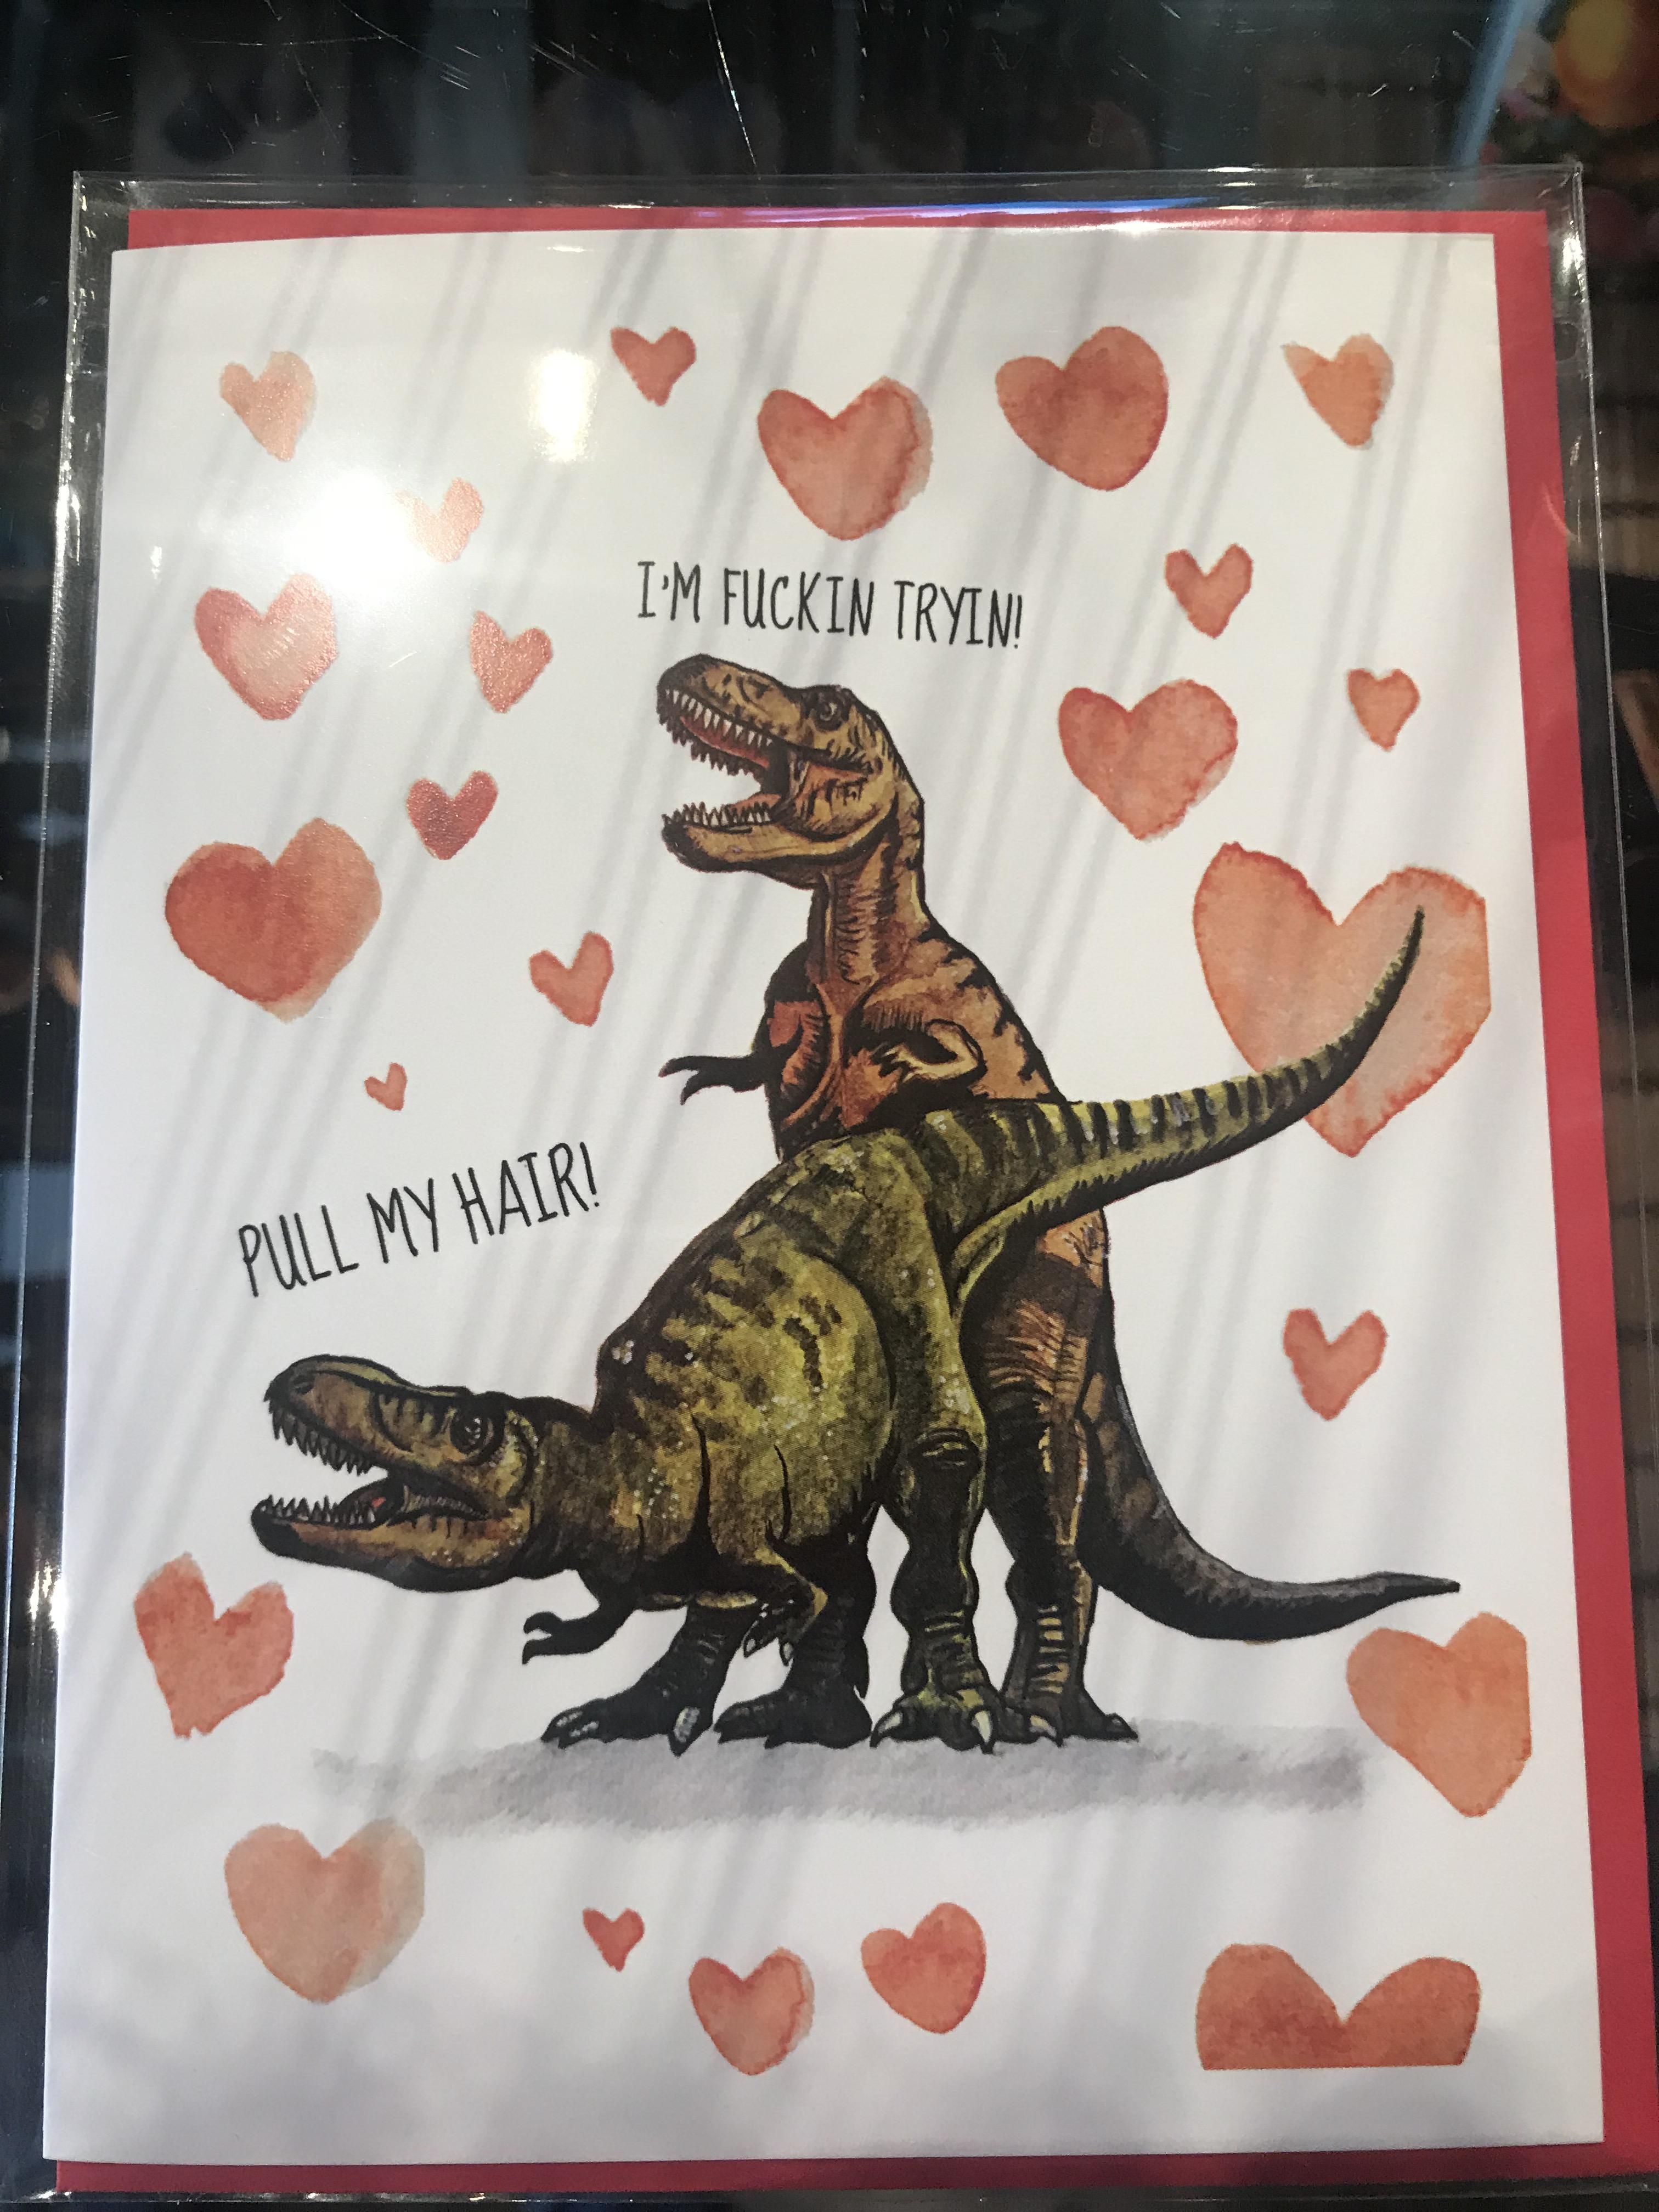 The best card I’ve ever found.